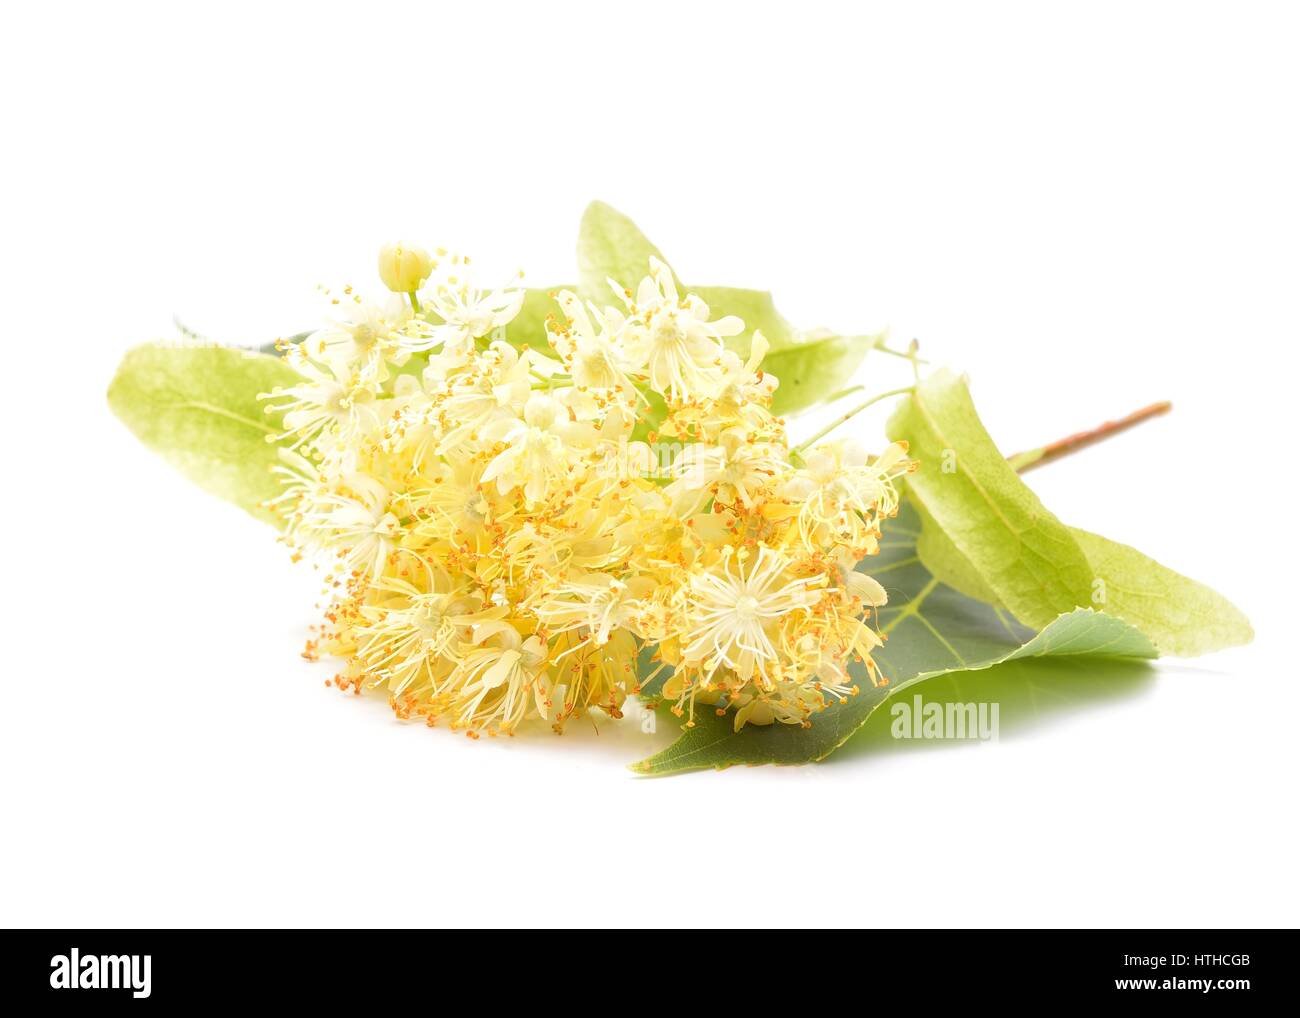 Linden (also known as lime and basswood) flowers Stock Photo